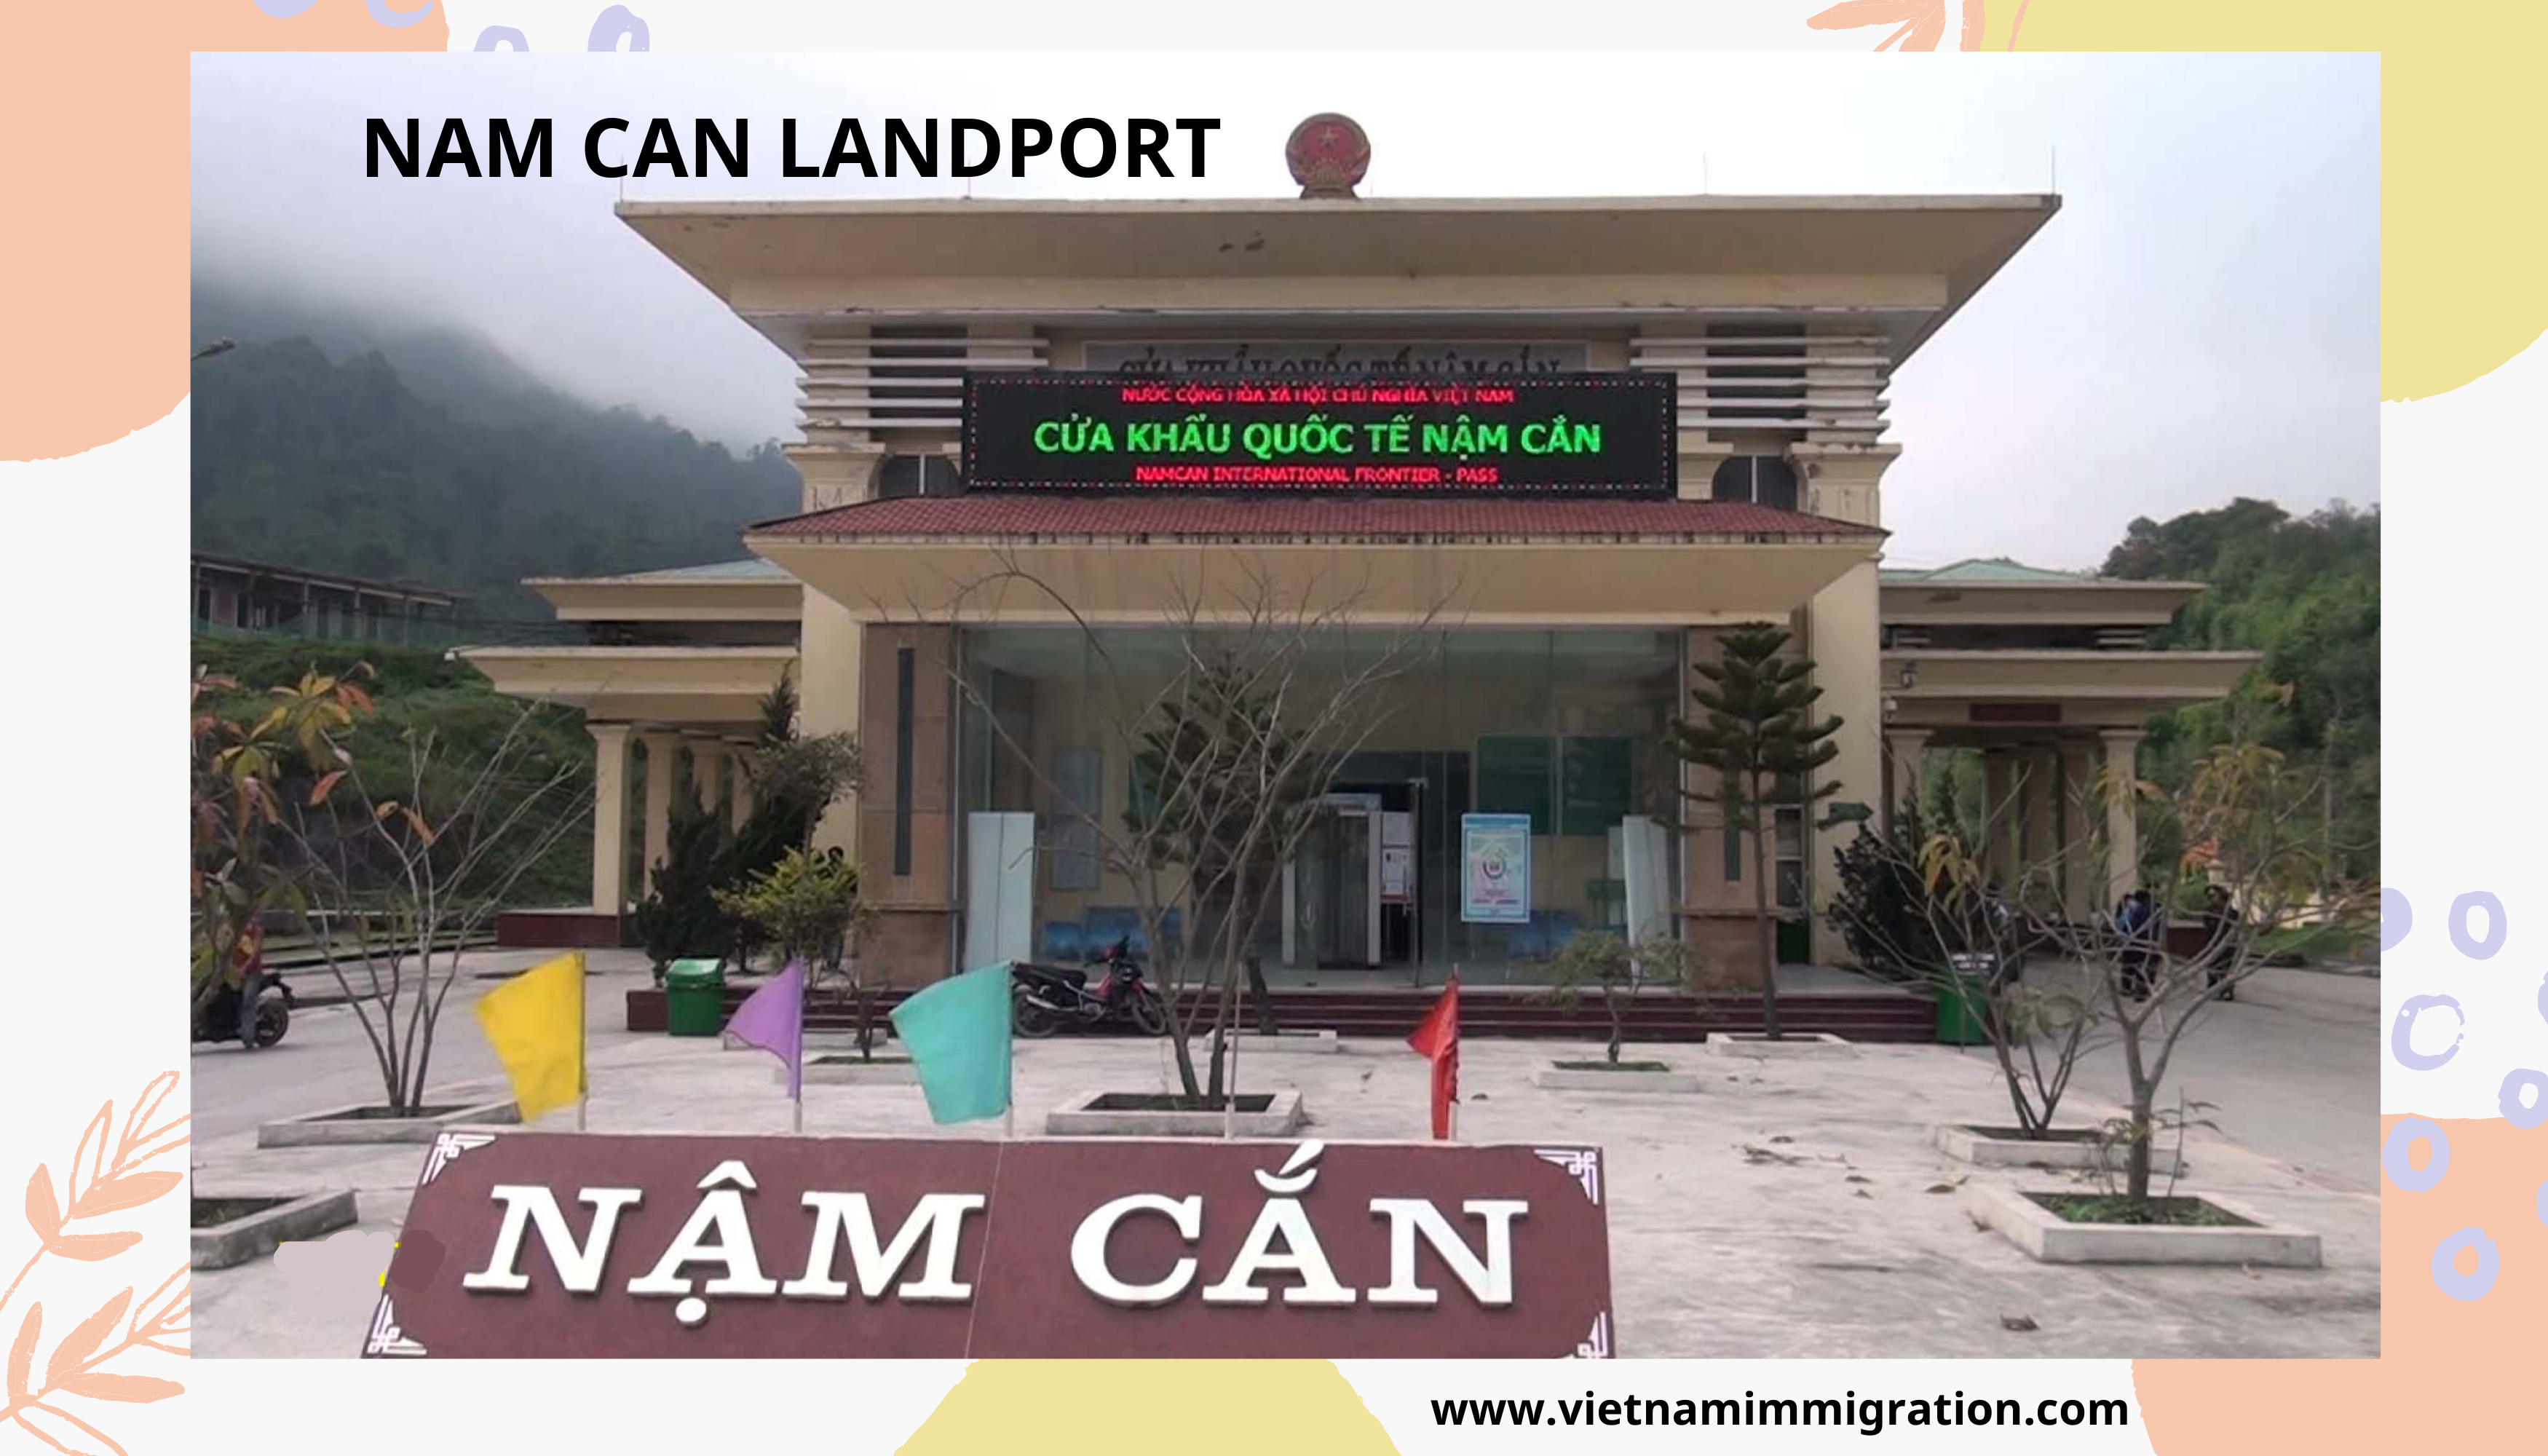 Vietnam E-visa for Crossing Nam Can Border in 2024 | How to Apply for Vietnam E-visa For getting into Nam Can Landport